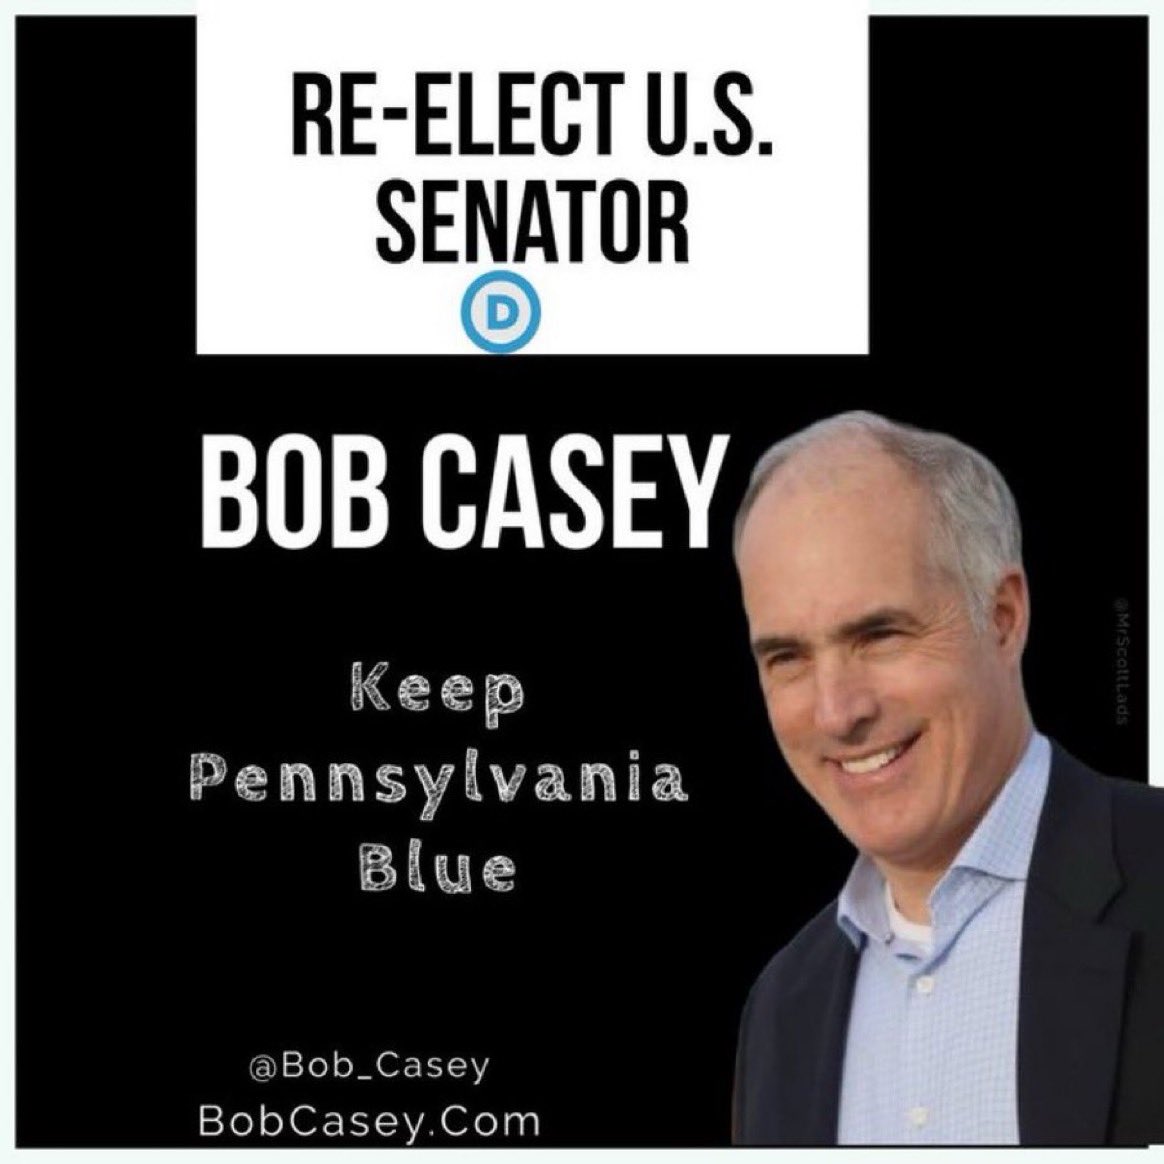 #ProudBlue #wtpBLUE #wtpGOTV24 #DemsUnited 

With the PA primary gone with the wind, the general election has officially begun in PA, for Bob Casey and other Democrats - It’s time we step up our campaigning to re-elect Bob

Bob will continue to work on corporate gouging to lower